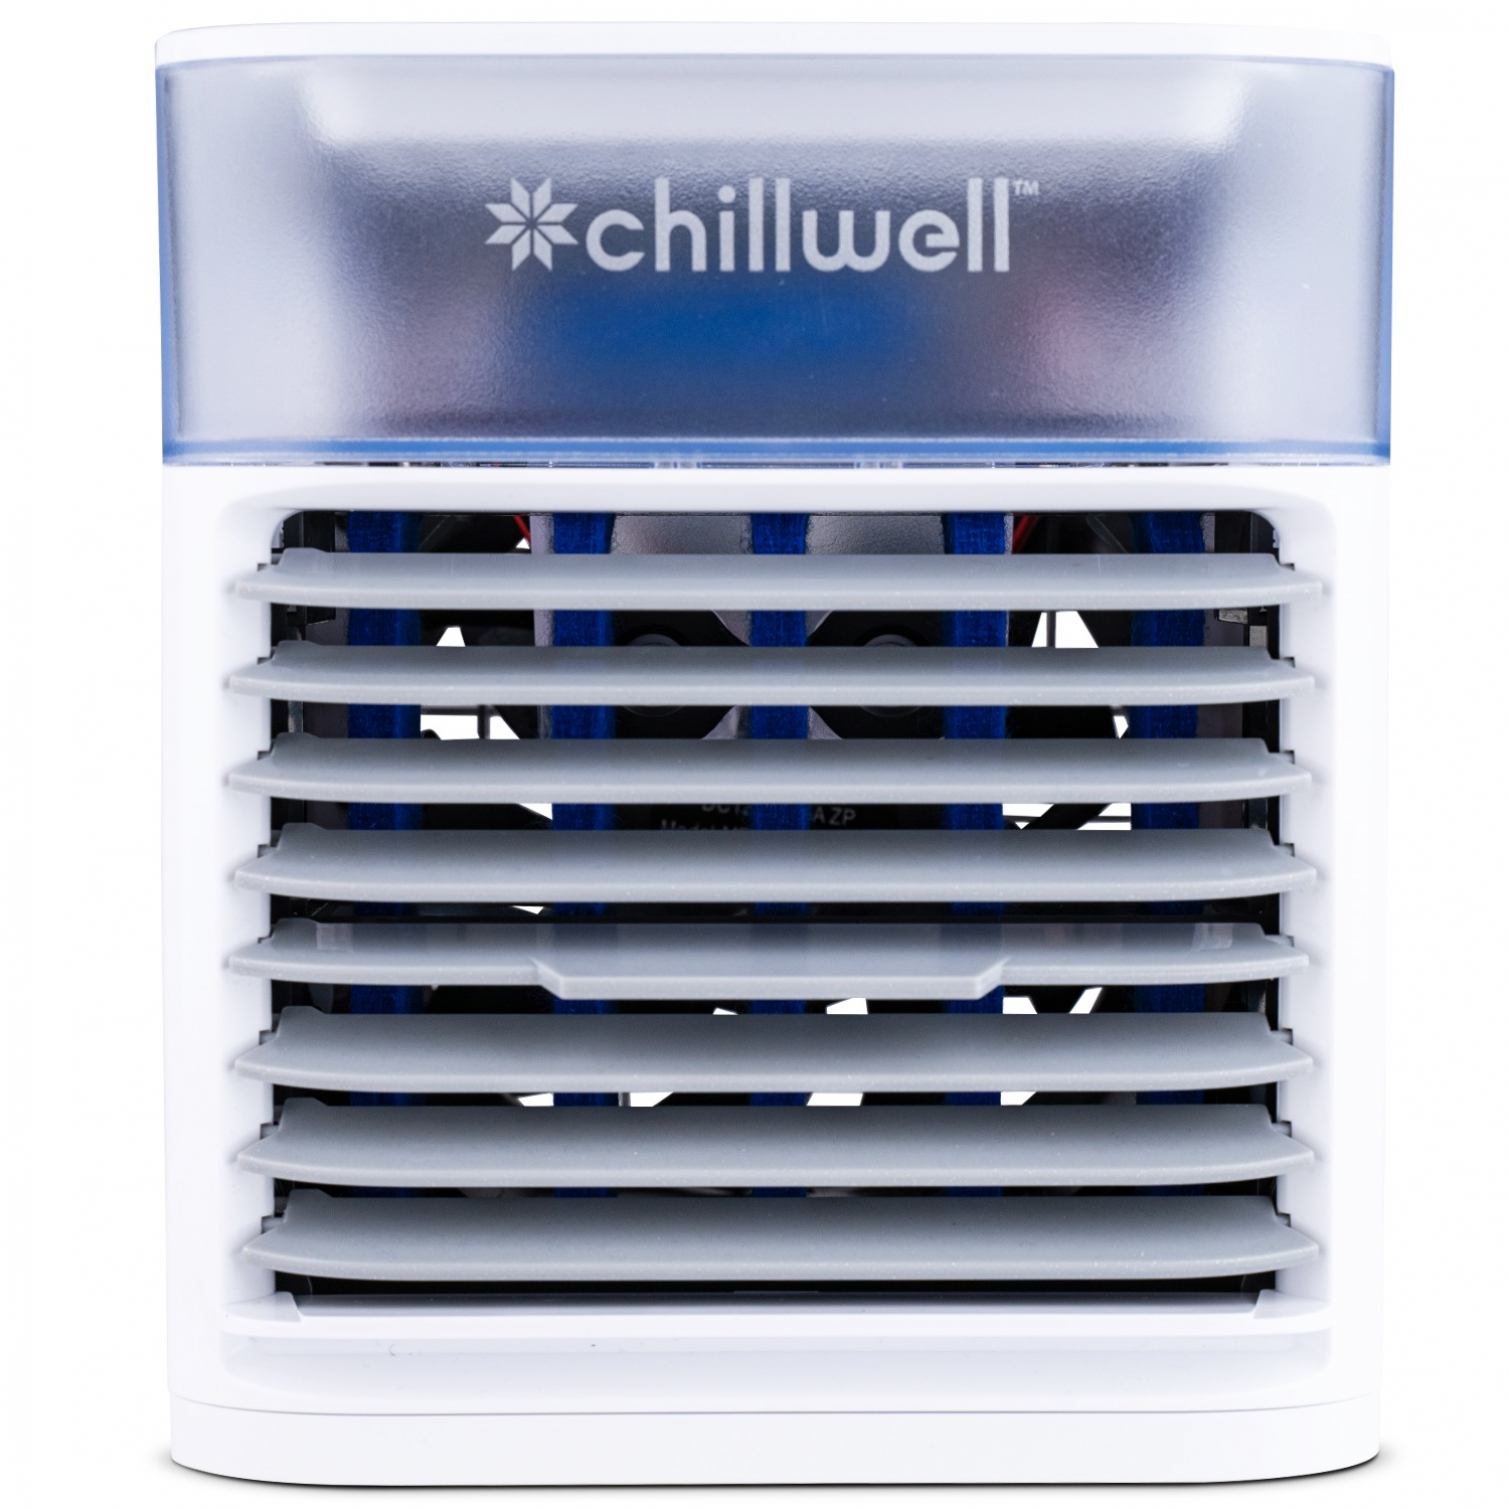 Mini Chillwell AC Cooler Review